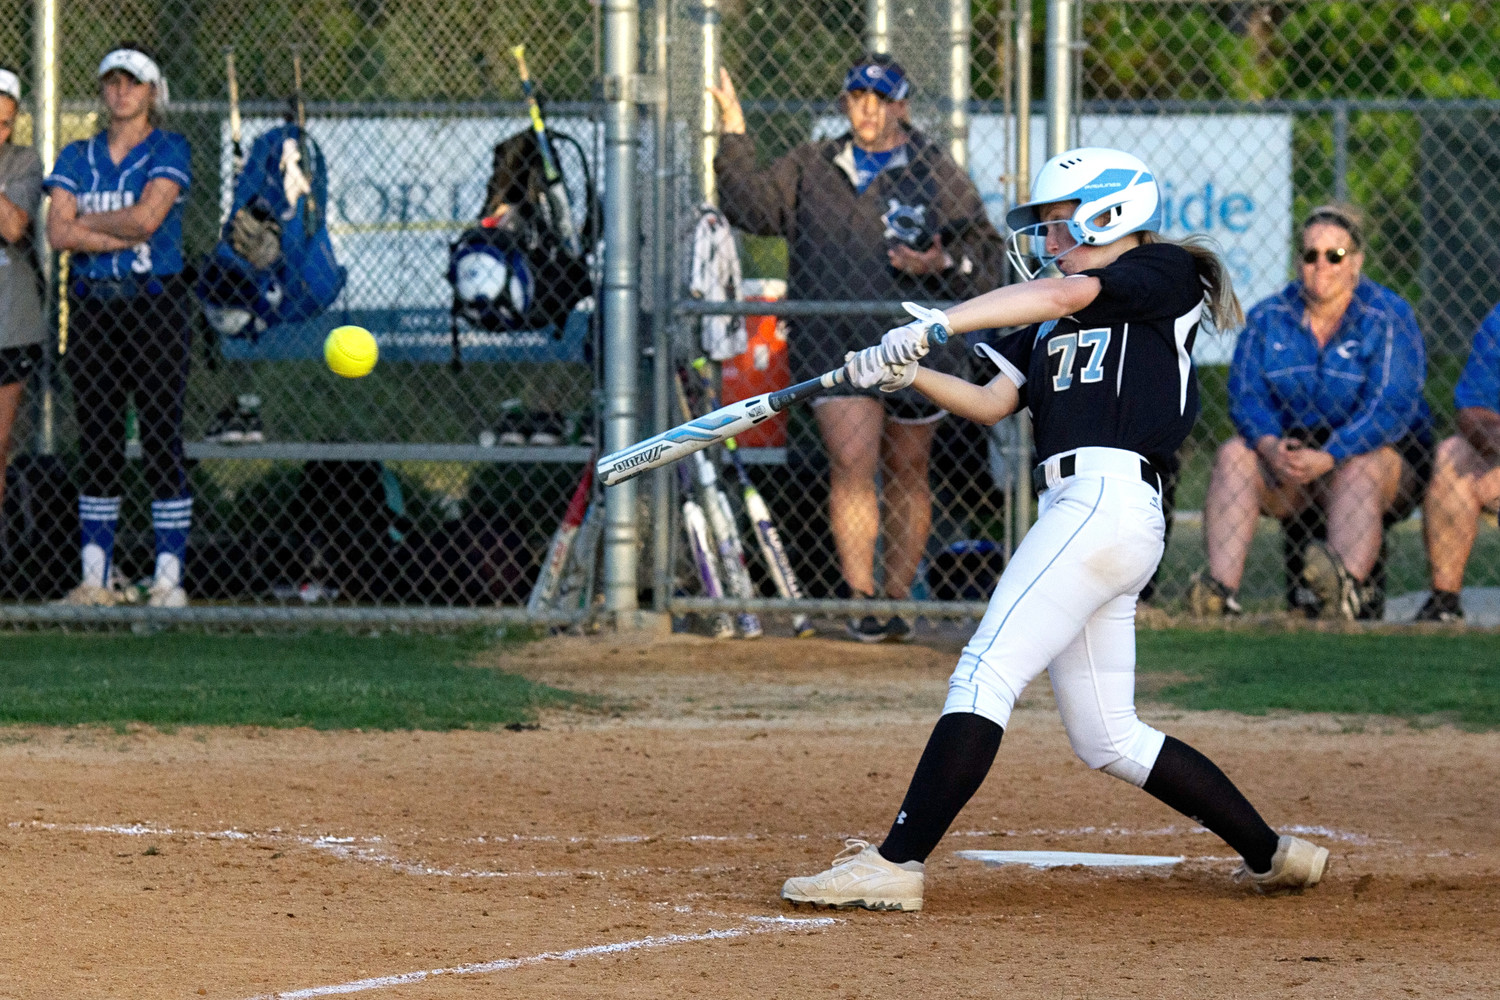 # 77 Maggie Richardson lines a base hit for the Sharks